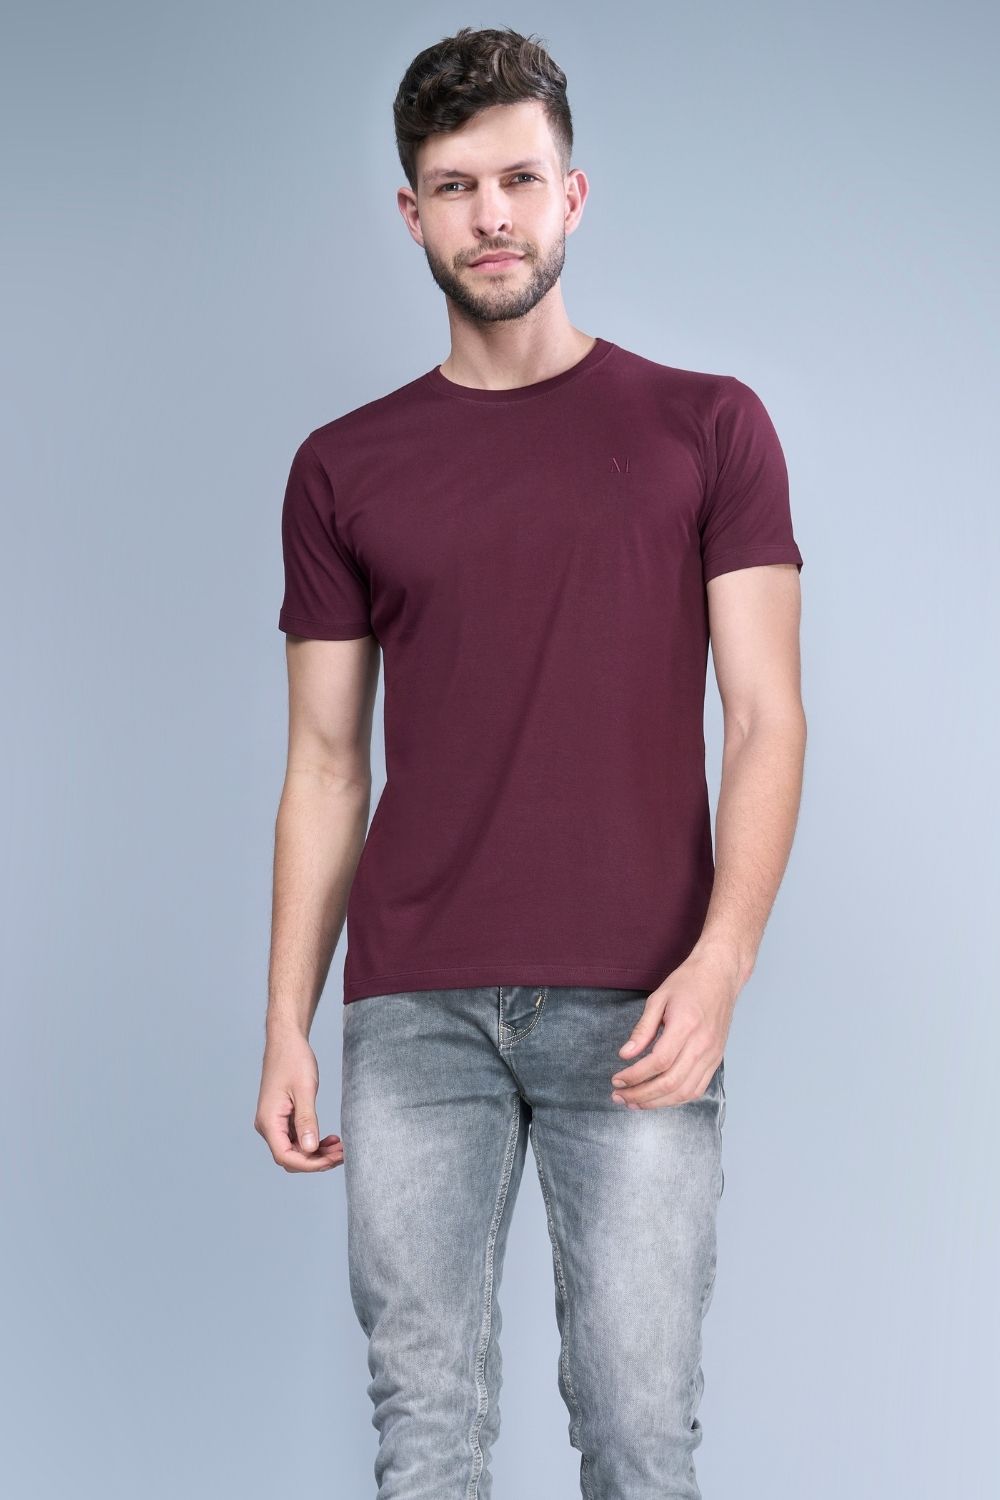 Heng Maroon colored, Solid T shirt for men, with half sleeves and round neck, full view.